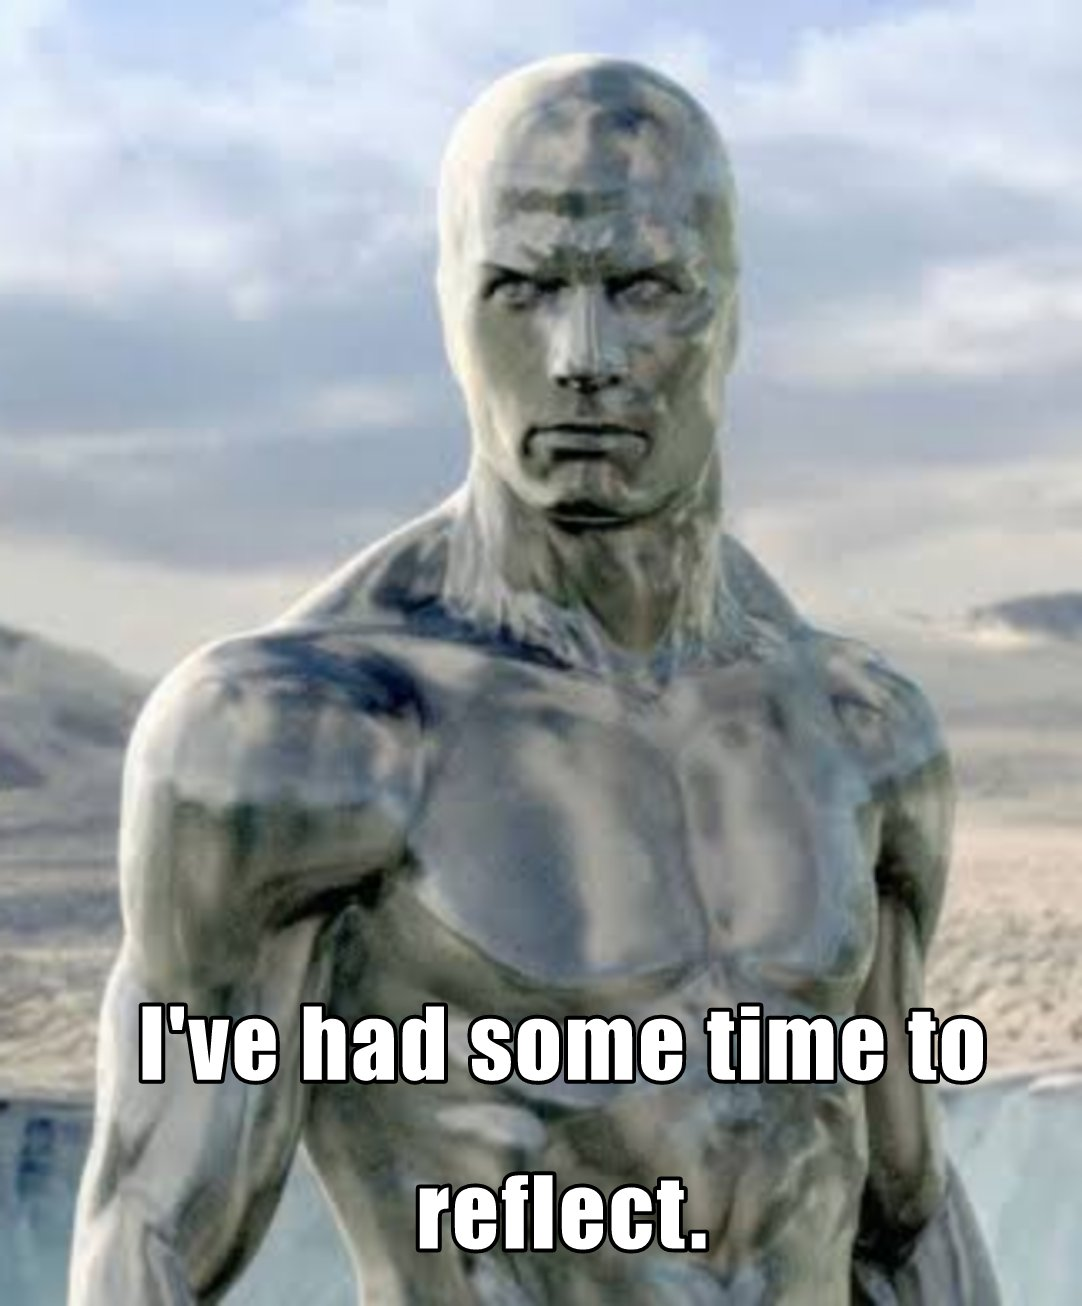 Year 2000 era 3D CG image of a masculine human being with chrome-like reflective skin and, well, everything. Text reads "I've had some time to reflect"